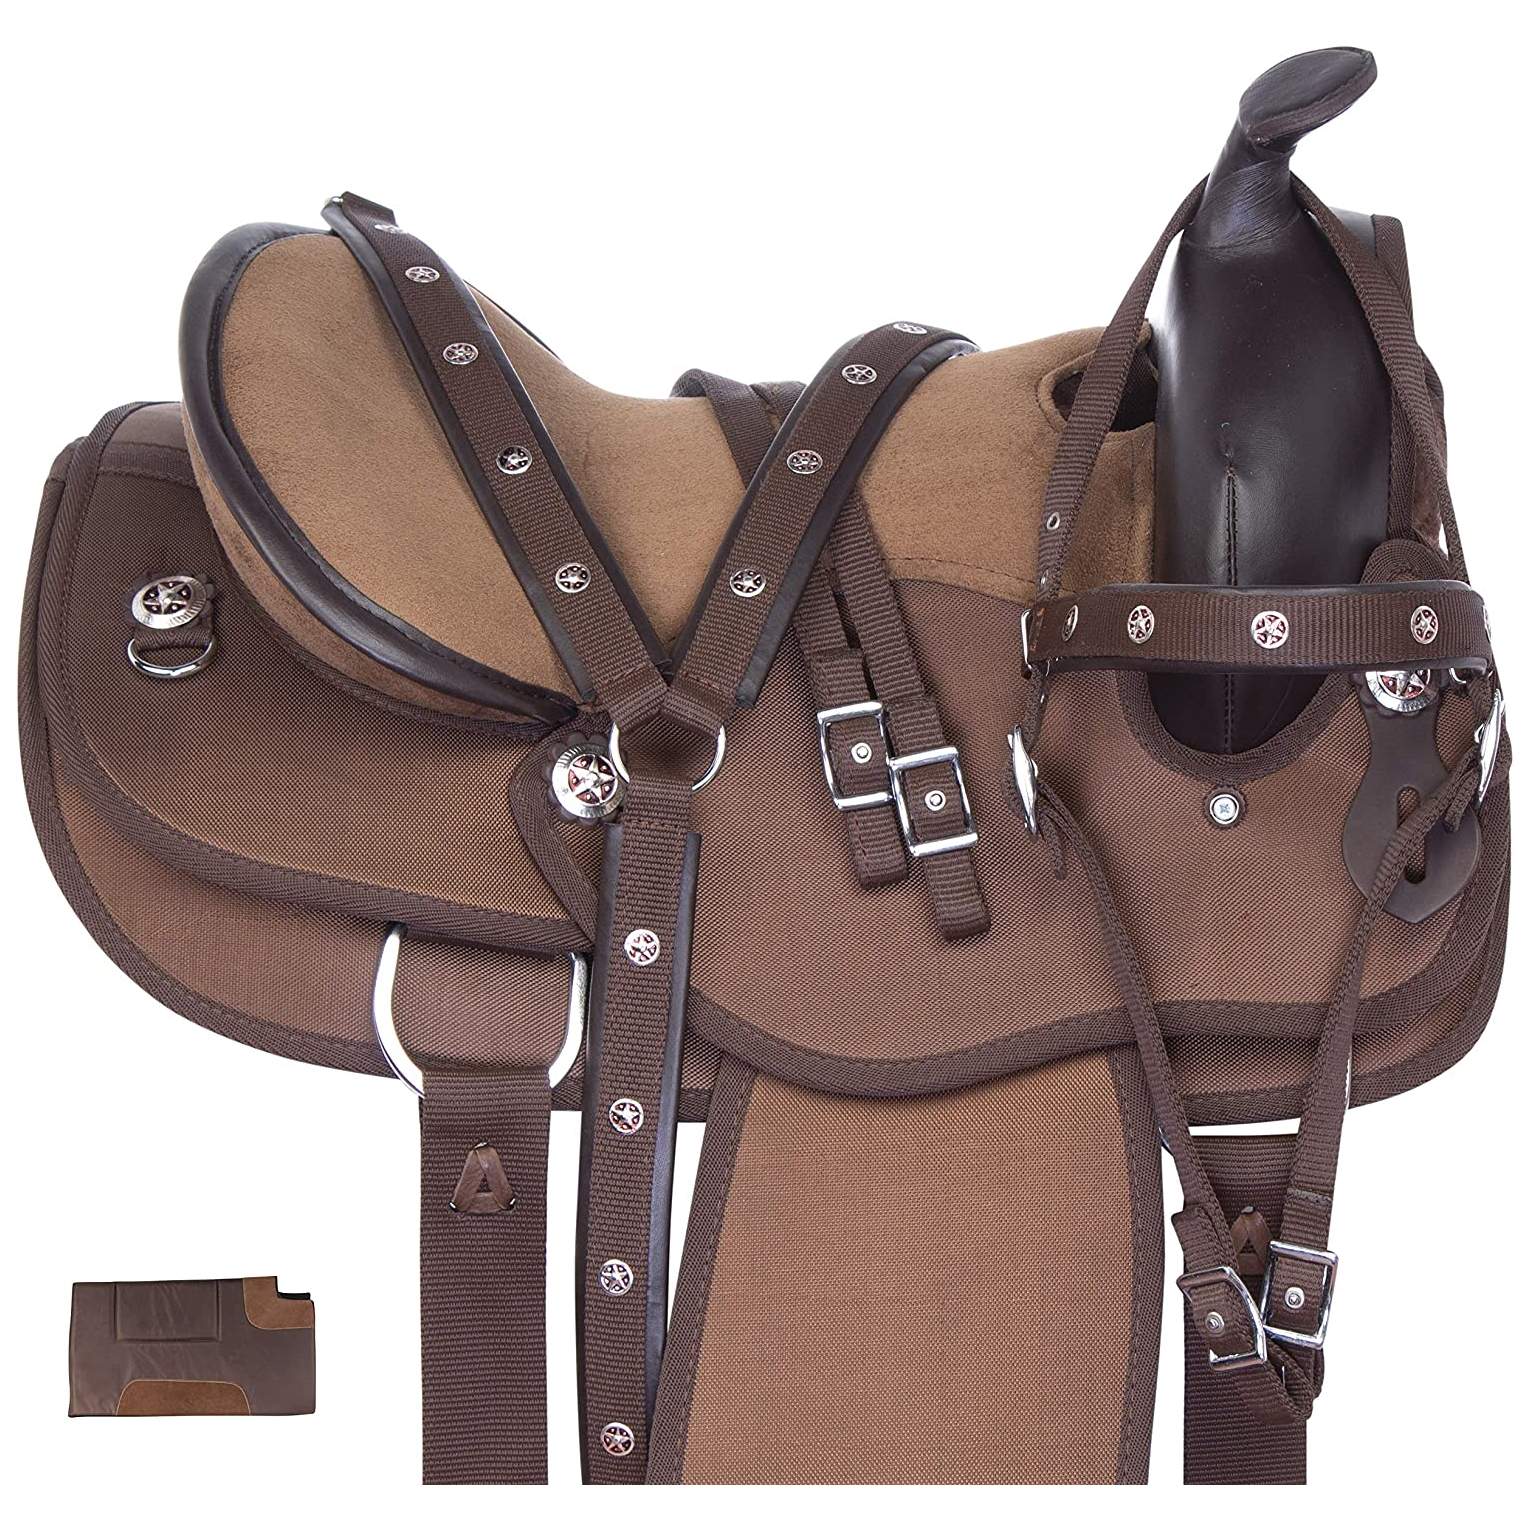 Acerugs New Comfy GAITED Western Pleasure Trail Show Horse Saddle